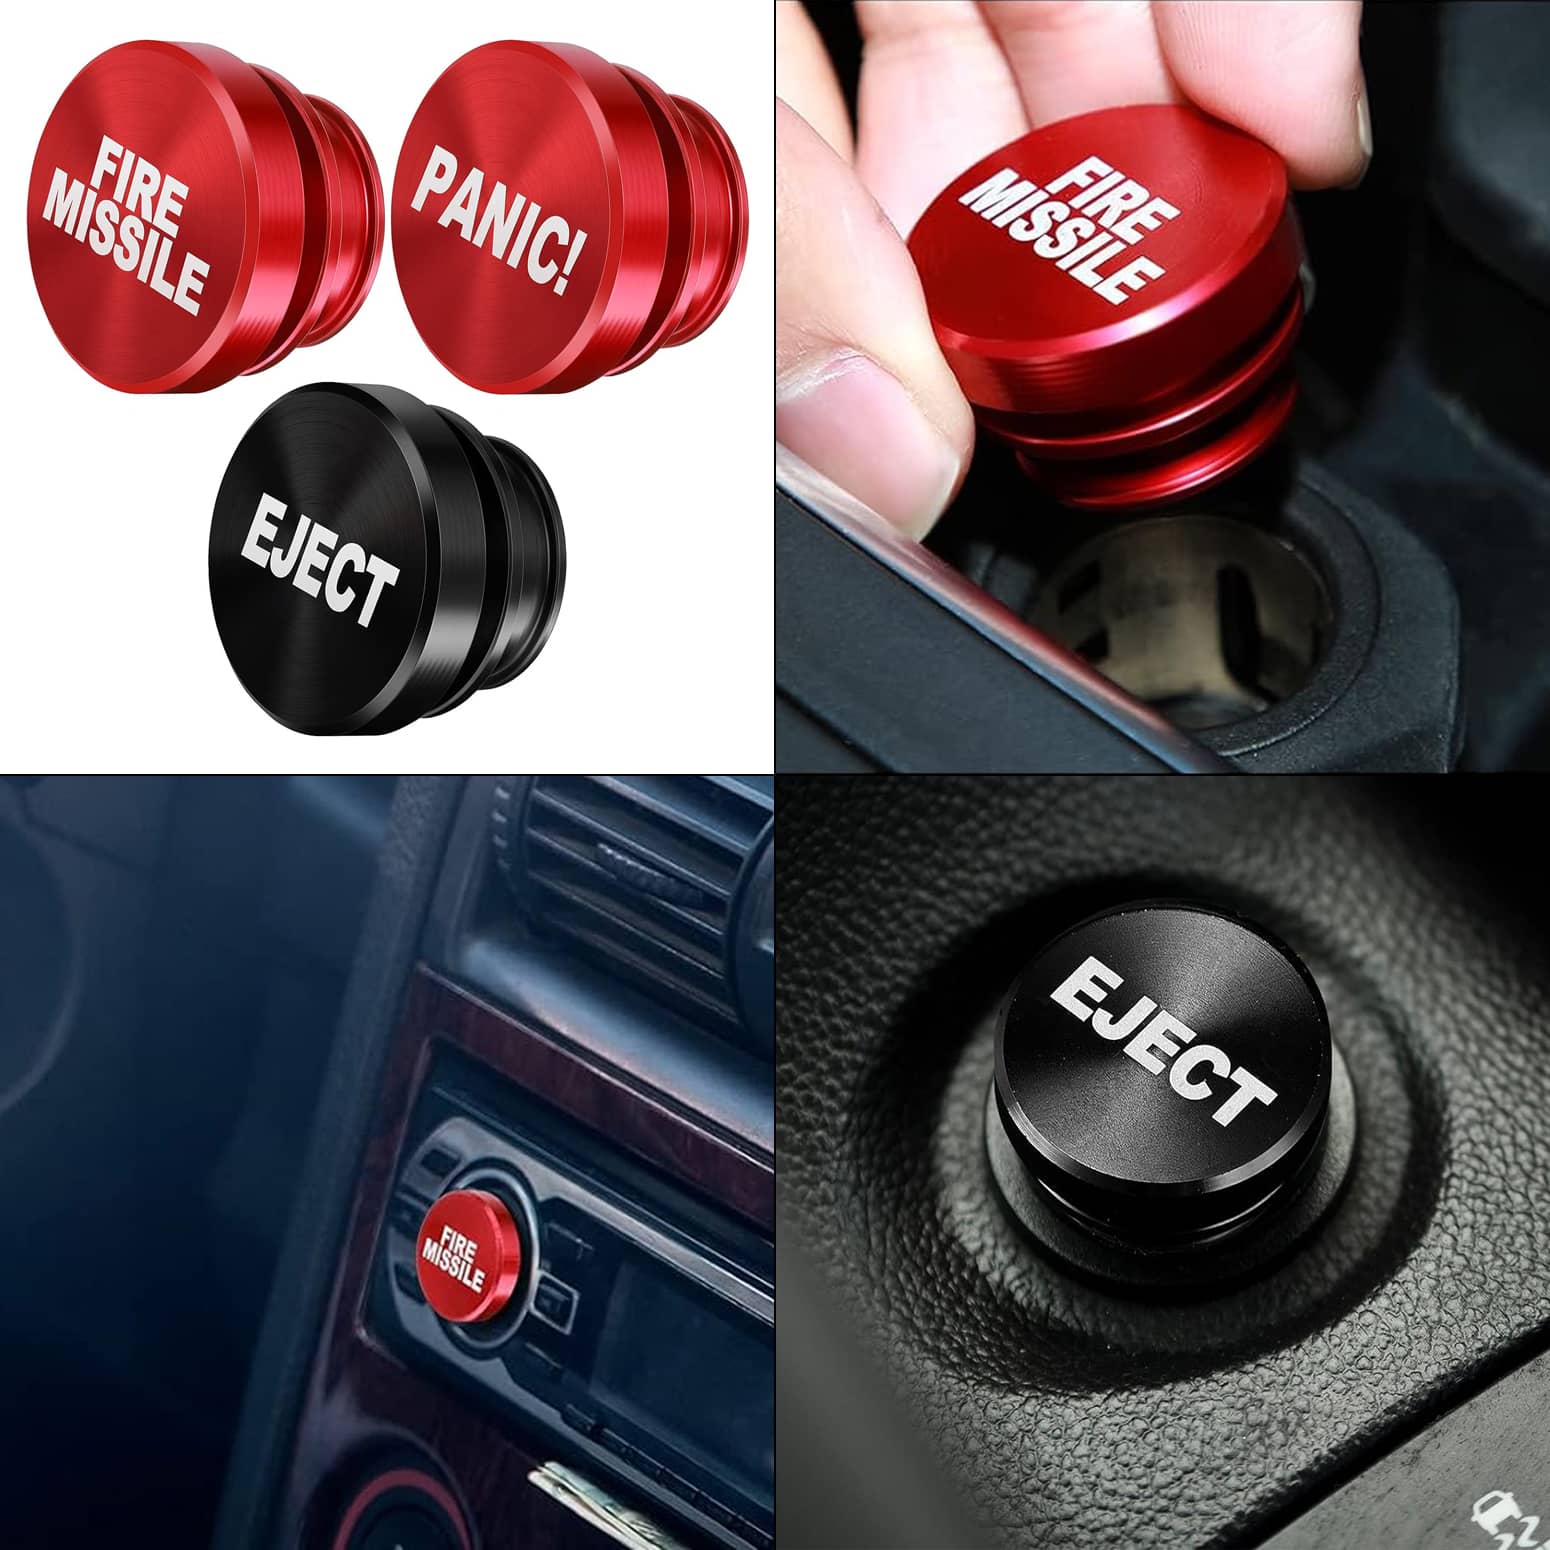 Fire Missile, Eject, and Panic! Button 12V Plug Covers